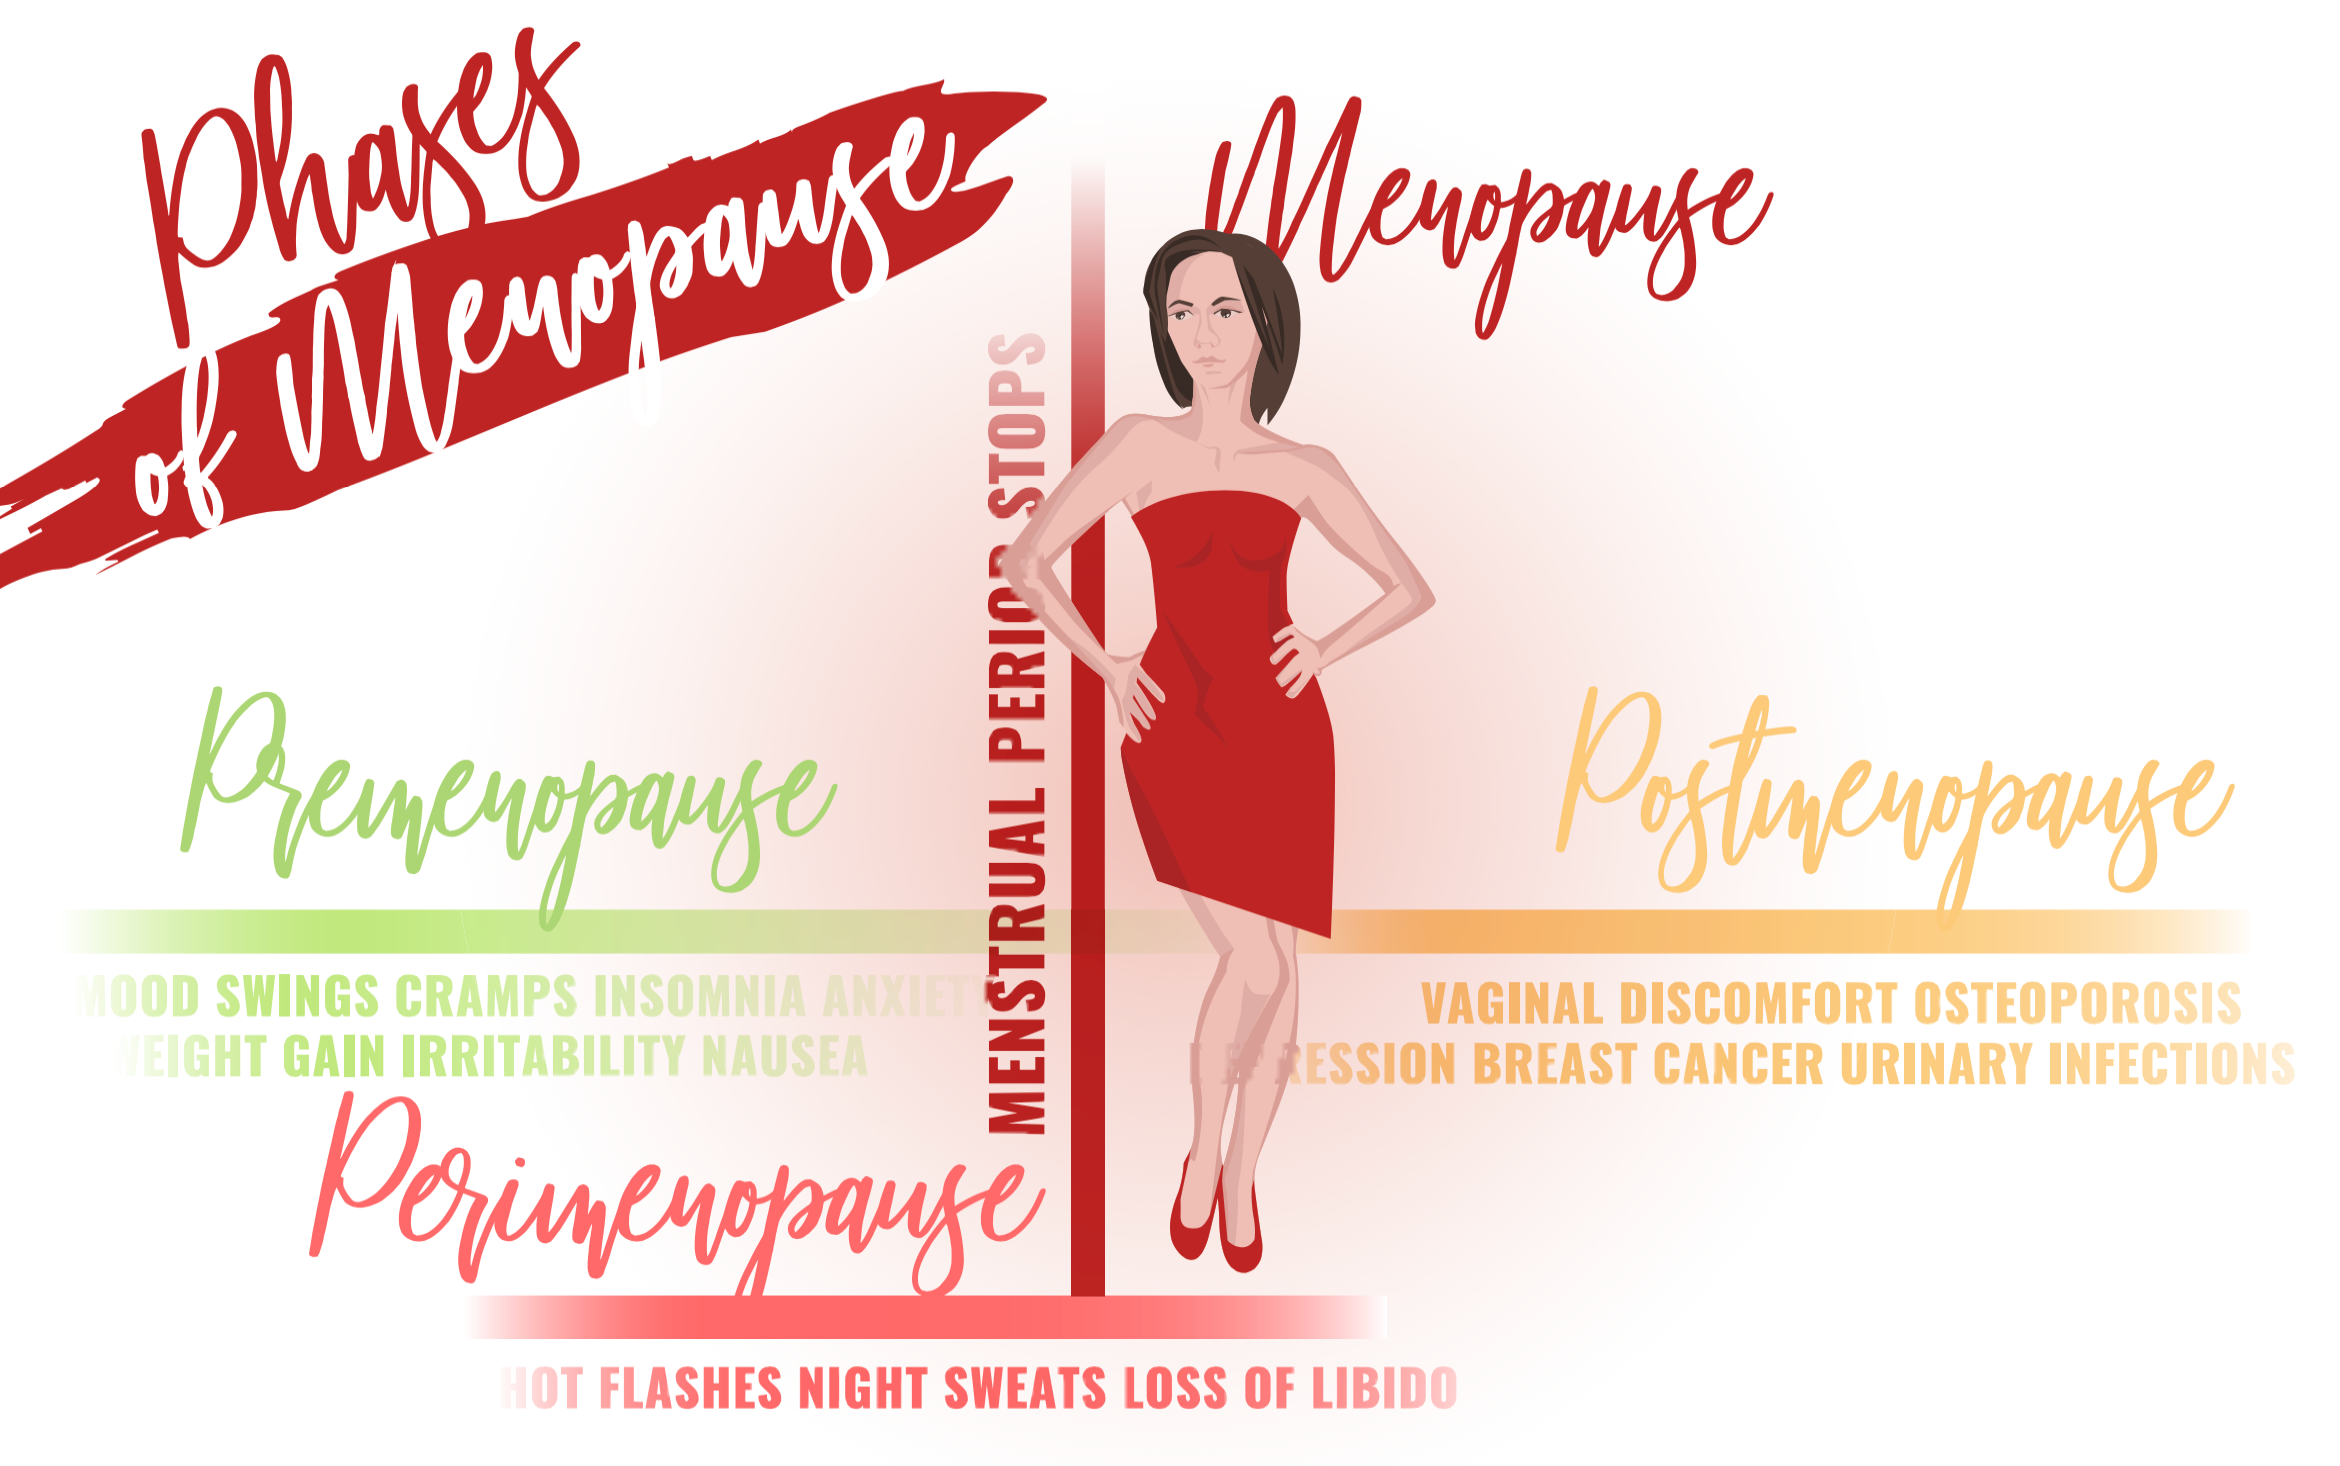 Premenopause, Perimenpause, and Menopause—What Does it All Mean